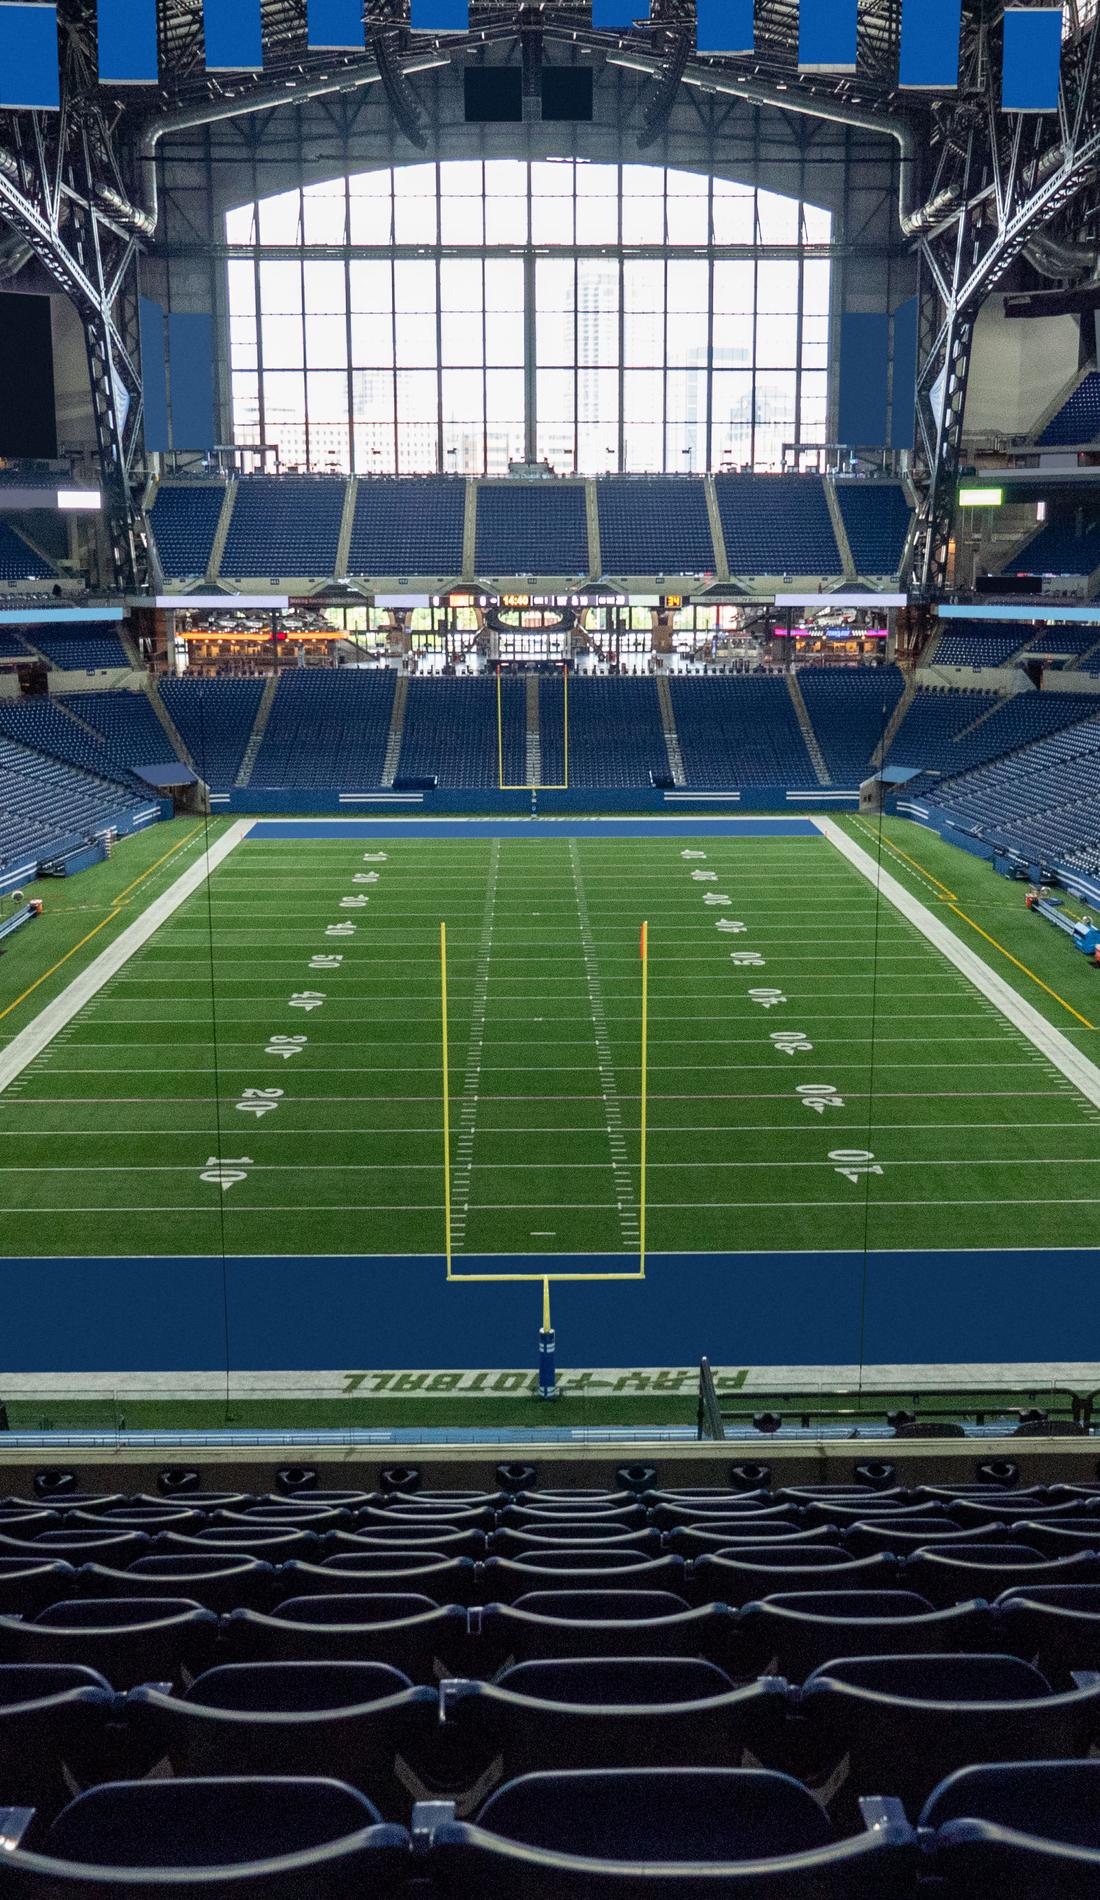 Colts to host Chicago Bears at Lucas Oil Stadium during 2023 preseason